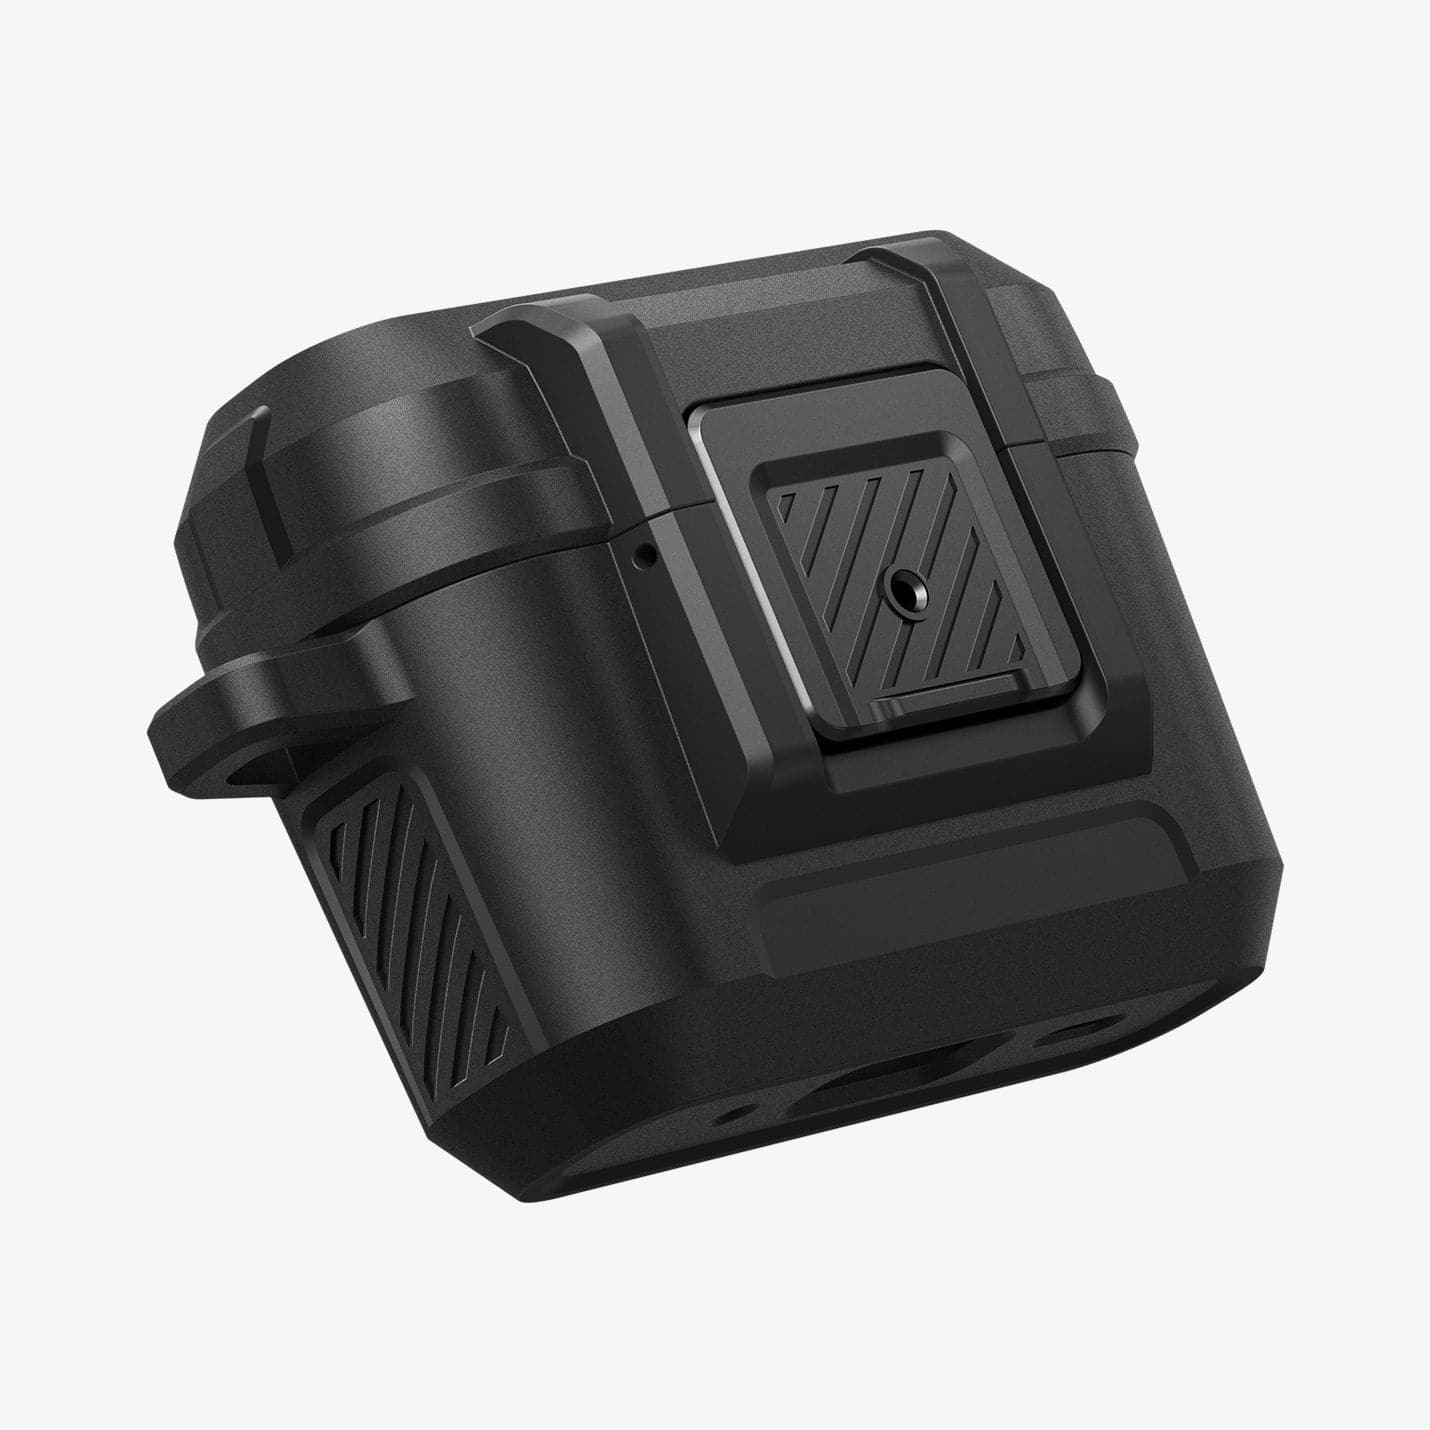 ACS05485 - Apple AirPods Pro 2 Case Lock Fit in matte black showing the front and side